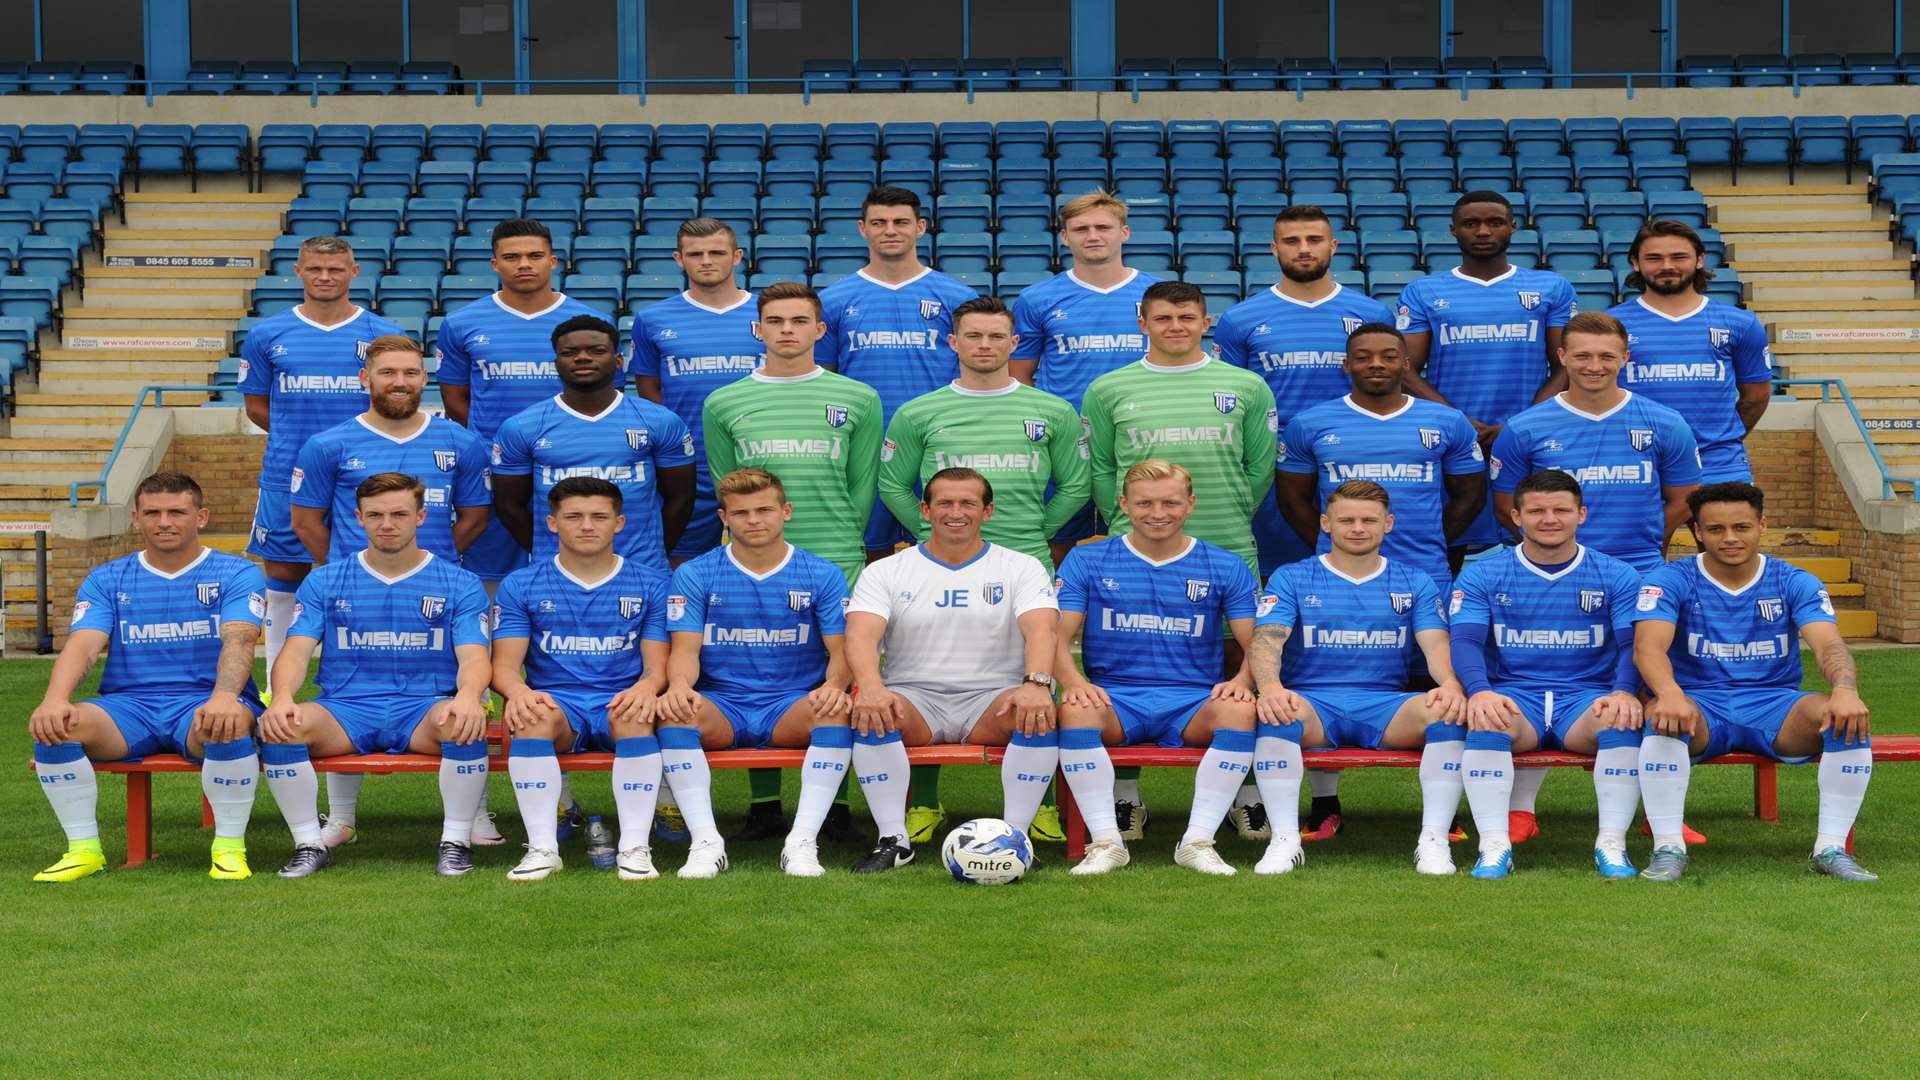 Gillingham's first team picture 2016/17 with manager Justin Edinburgh Picture: Steve Crispe